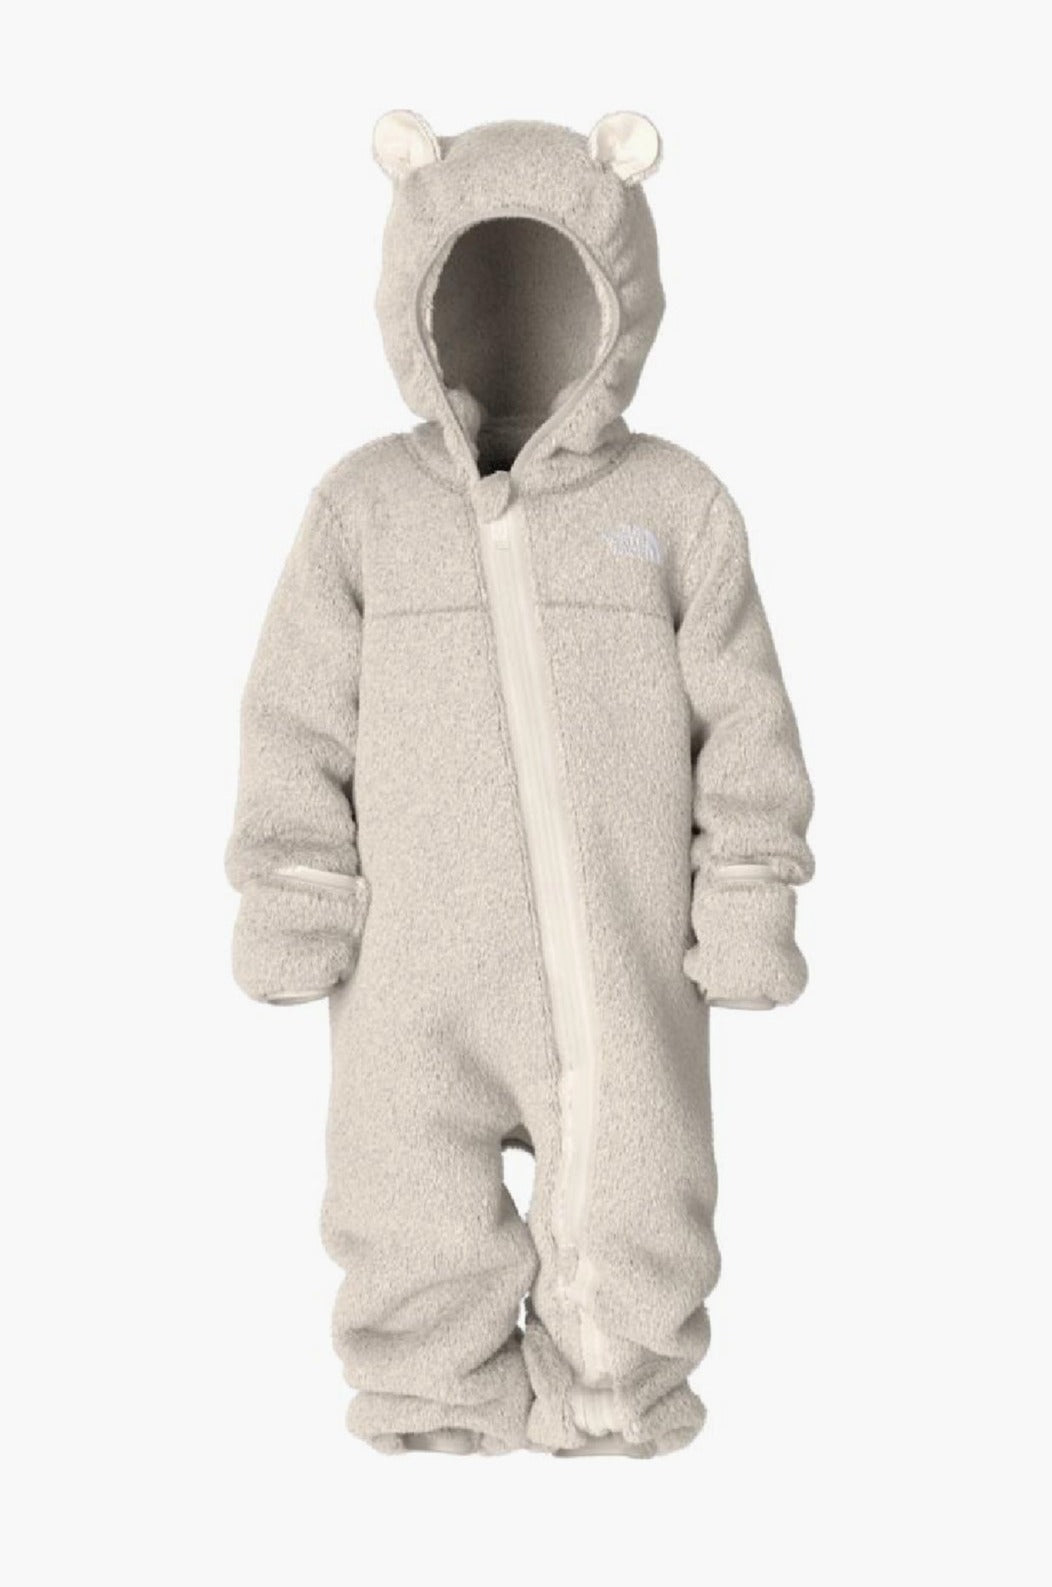 The North Face- Baby/Toddler 96 Nuptse One-Piece Jacket Atomizer